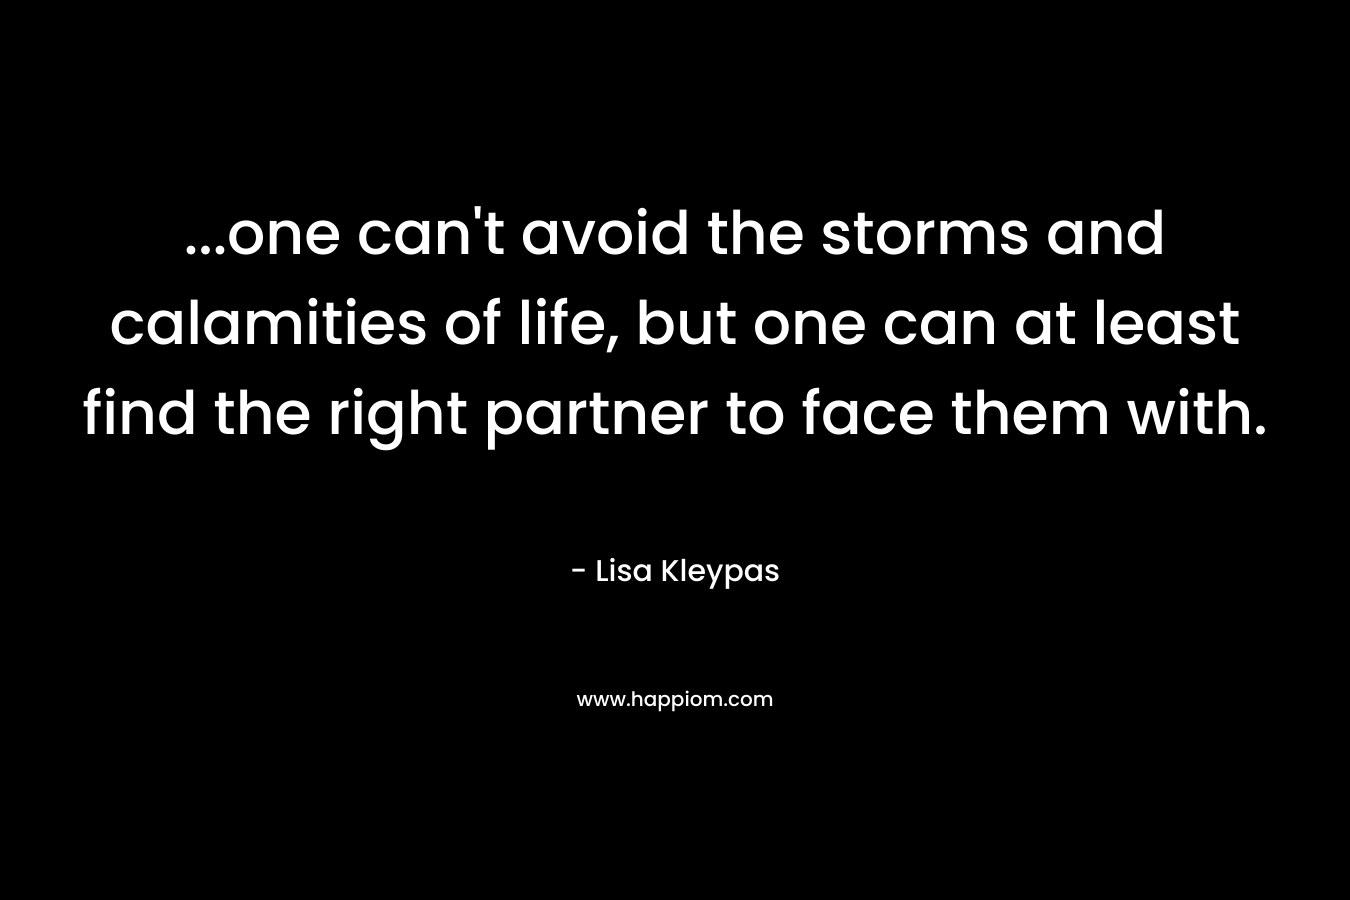 …one can’t avoid the storms and calamities of life, but one can at least find the right partner to face them with. – Lisa Kleypas